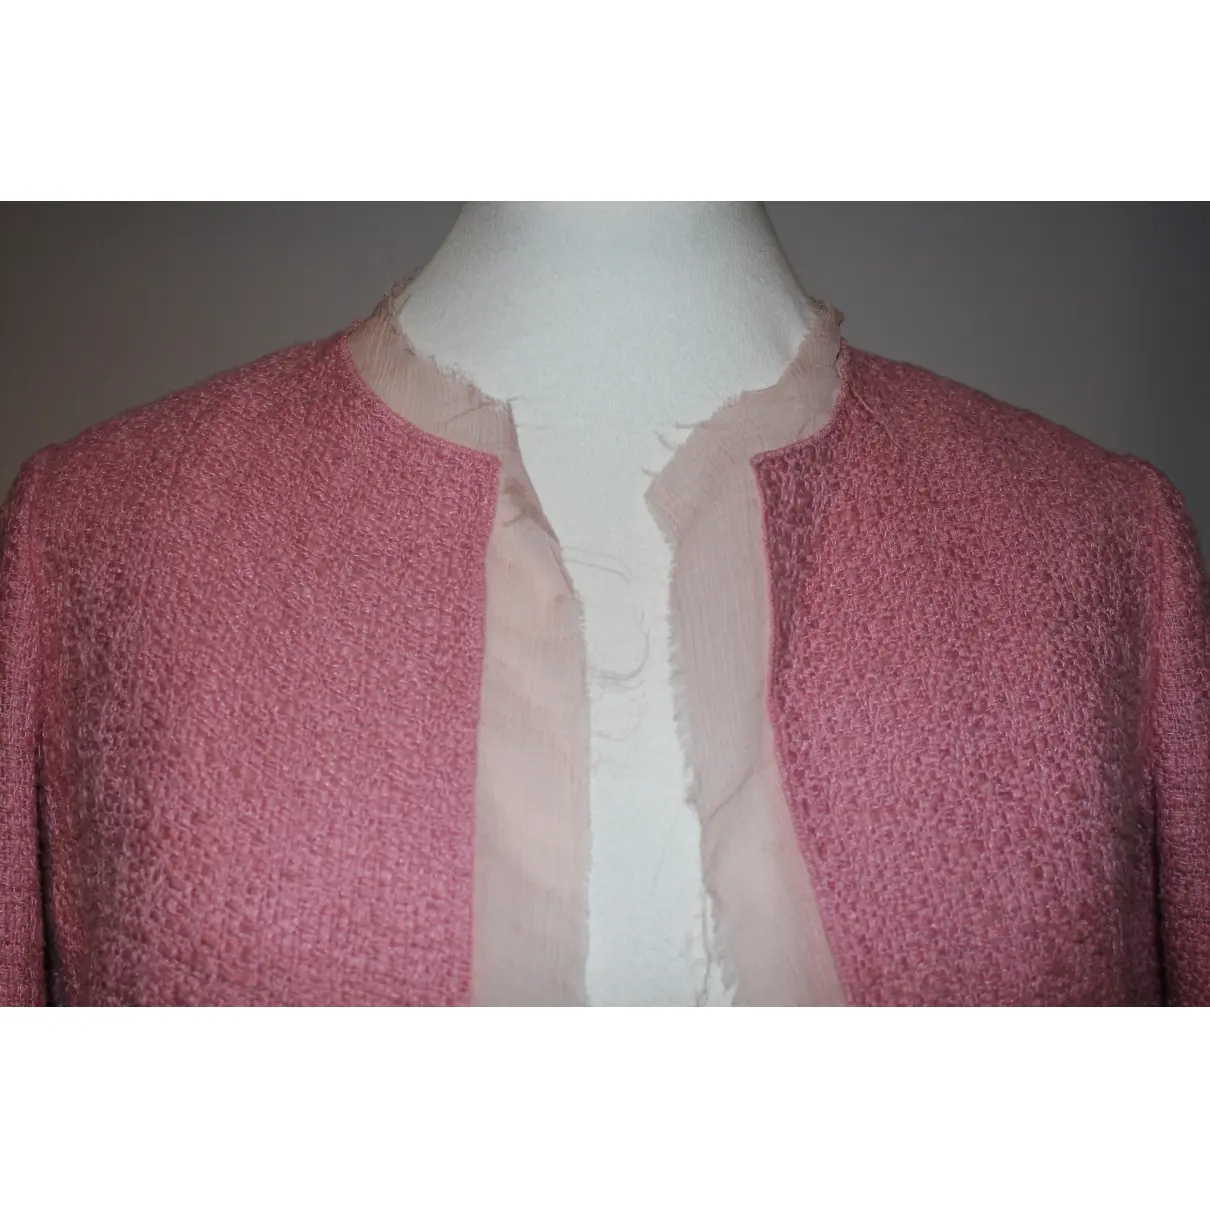 Clements Ribeiro Silk jacket for sale